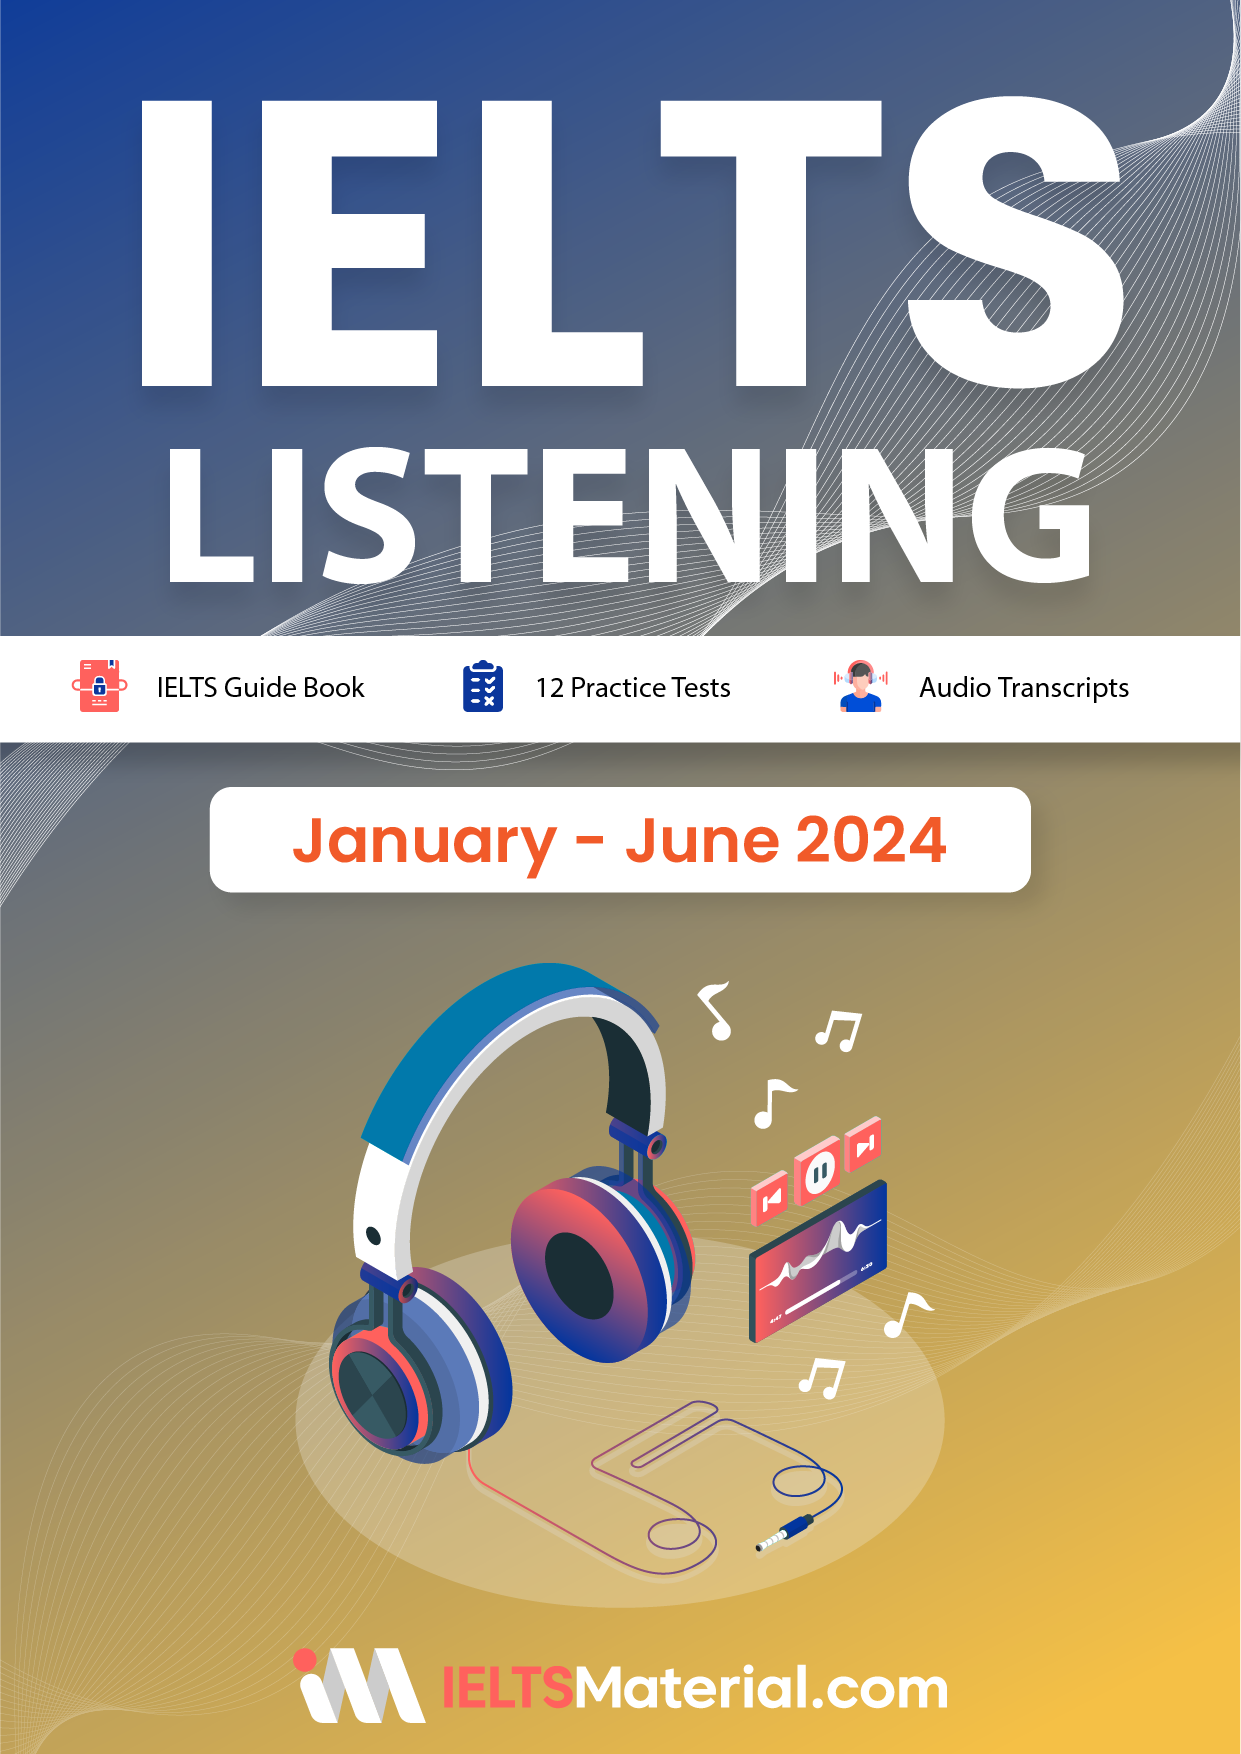 IELTS (General): Learner’s kit (5 in 1 Actual Tests eBook Combo )|(January – June 2024)